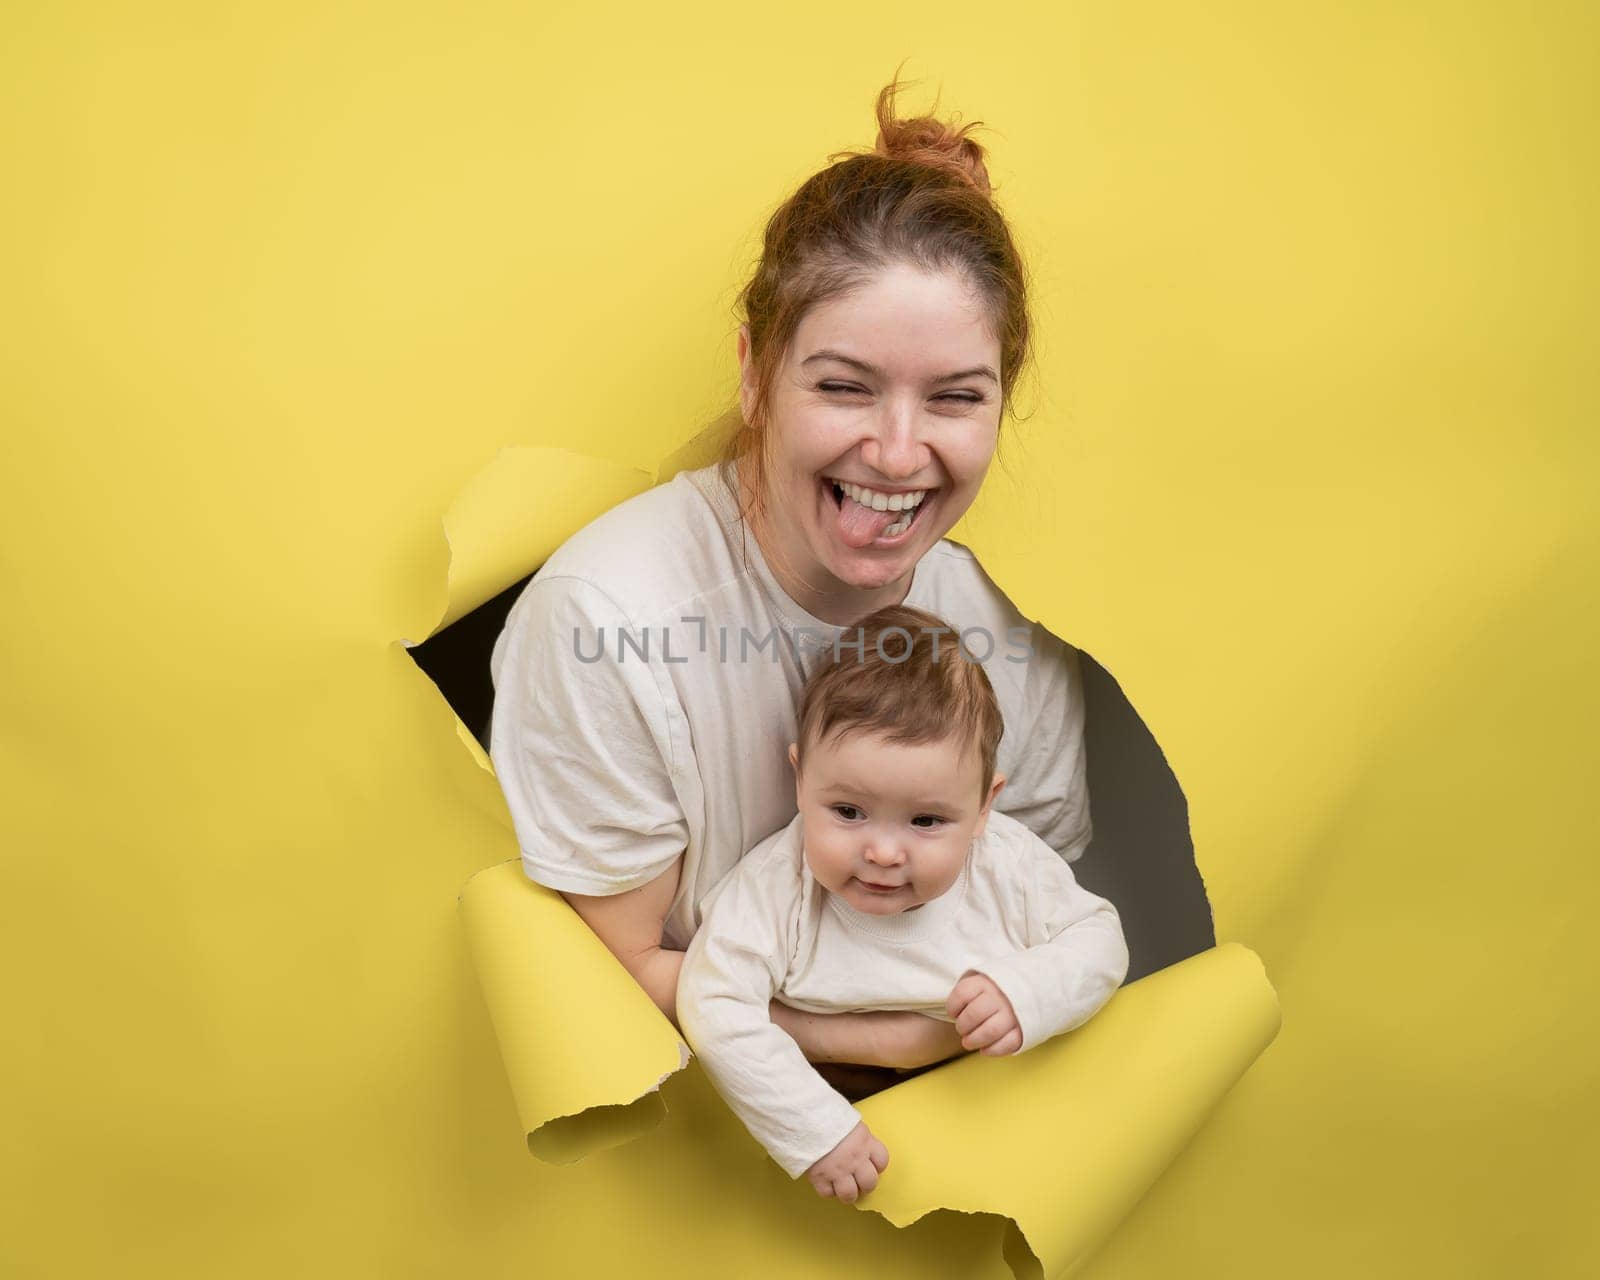 Cheerful Caucasian woman with little son rips and leans out through yellow cardboard background. by mrwed54